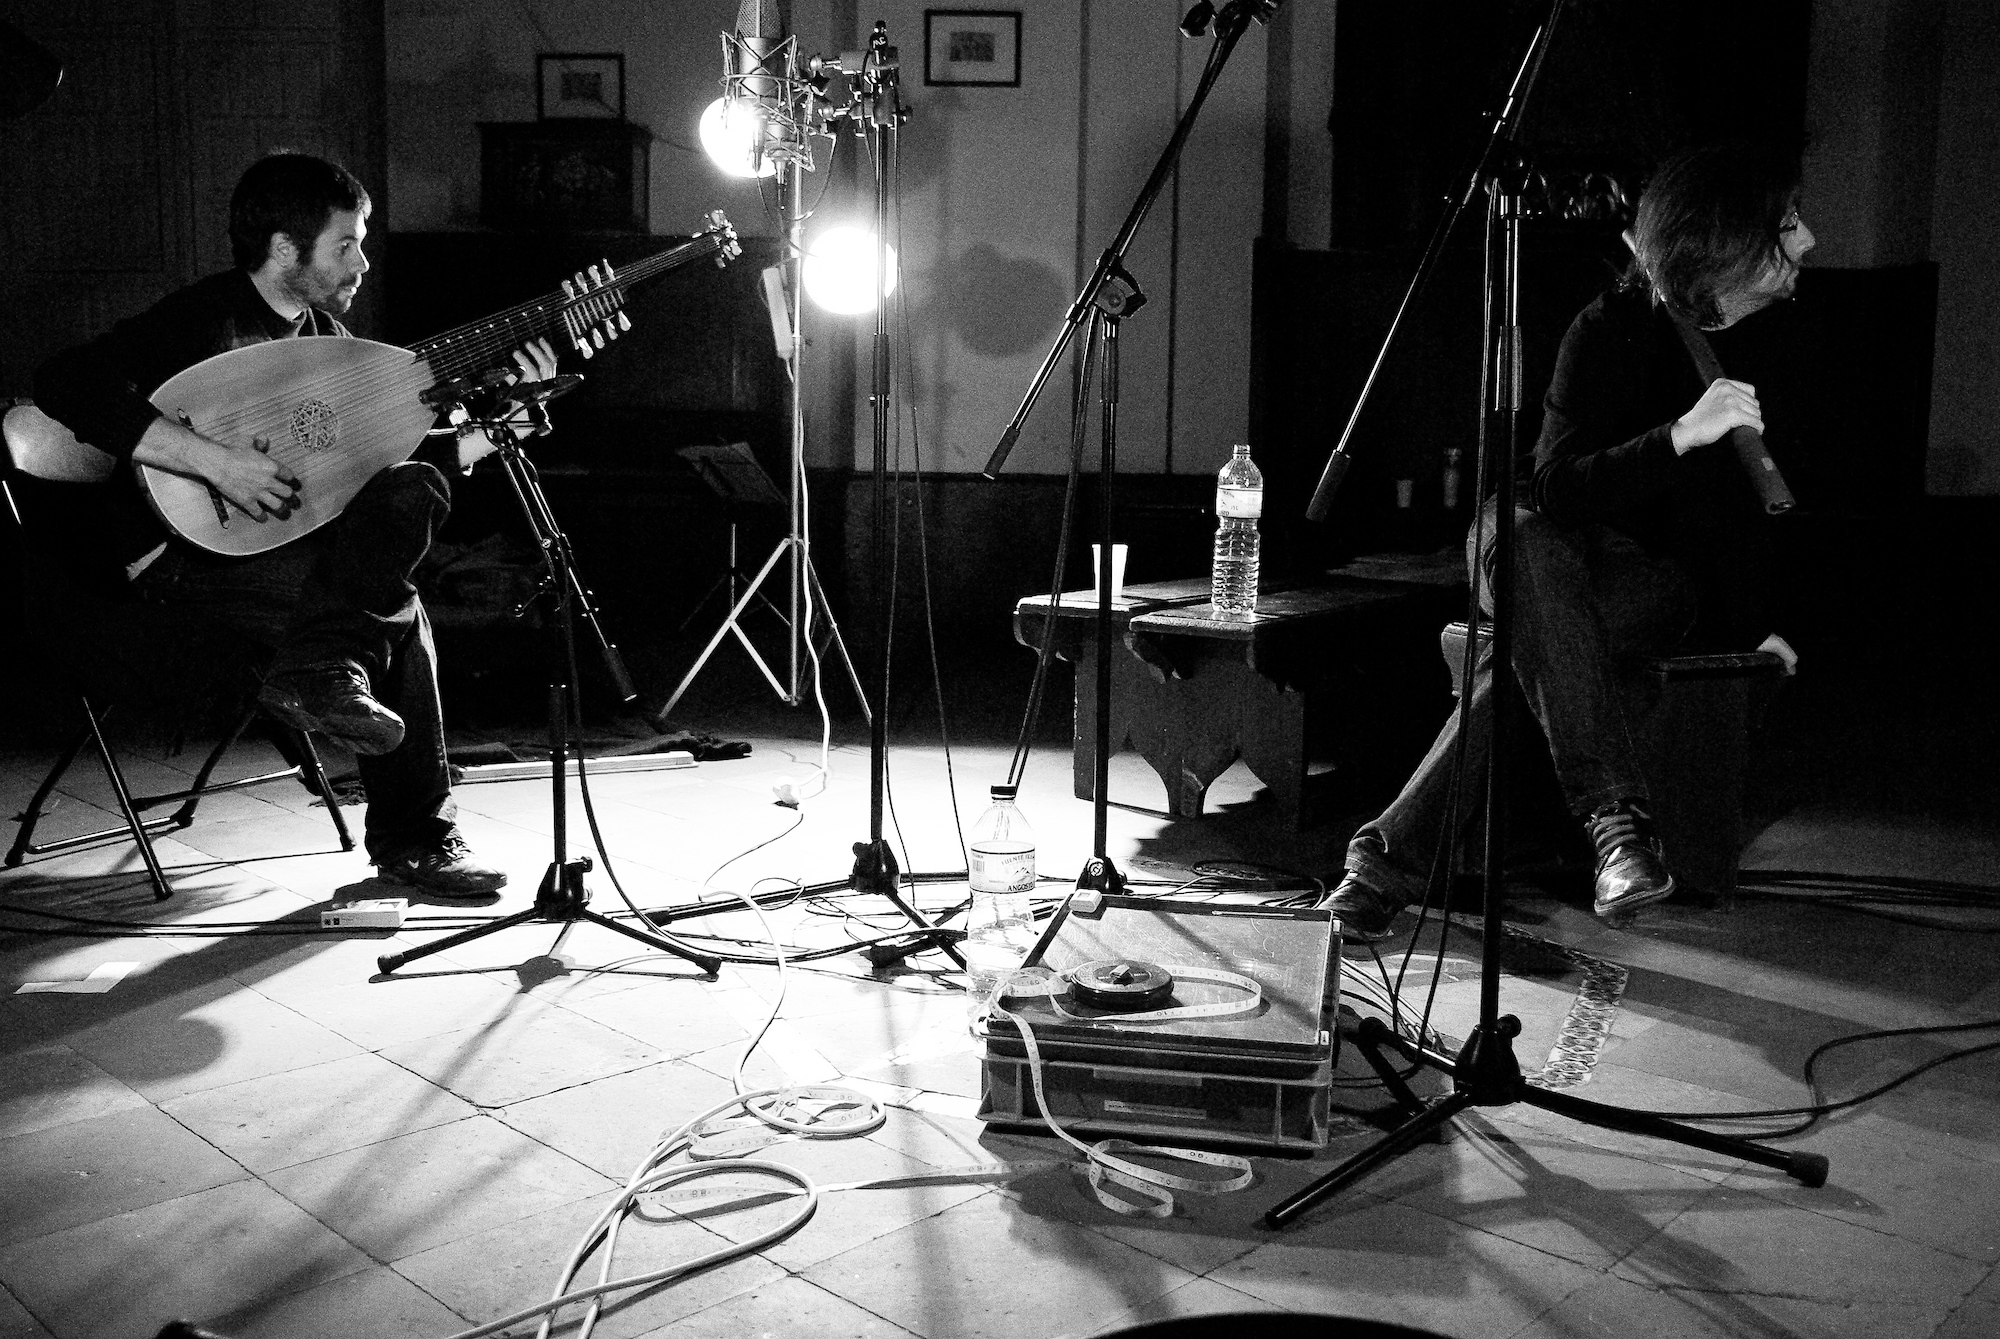 Miguel Rincón & Vicente Parrilla during the recording of the passacaglia improvisation on track 14